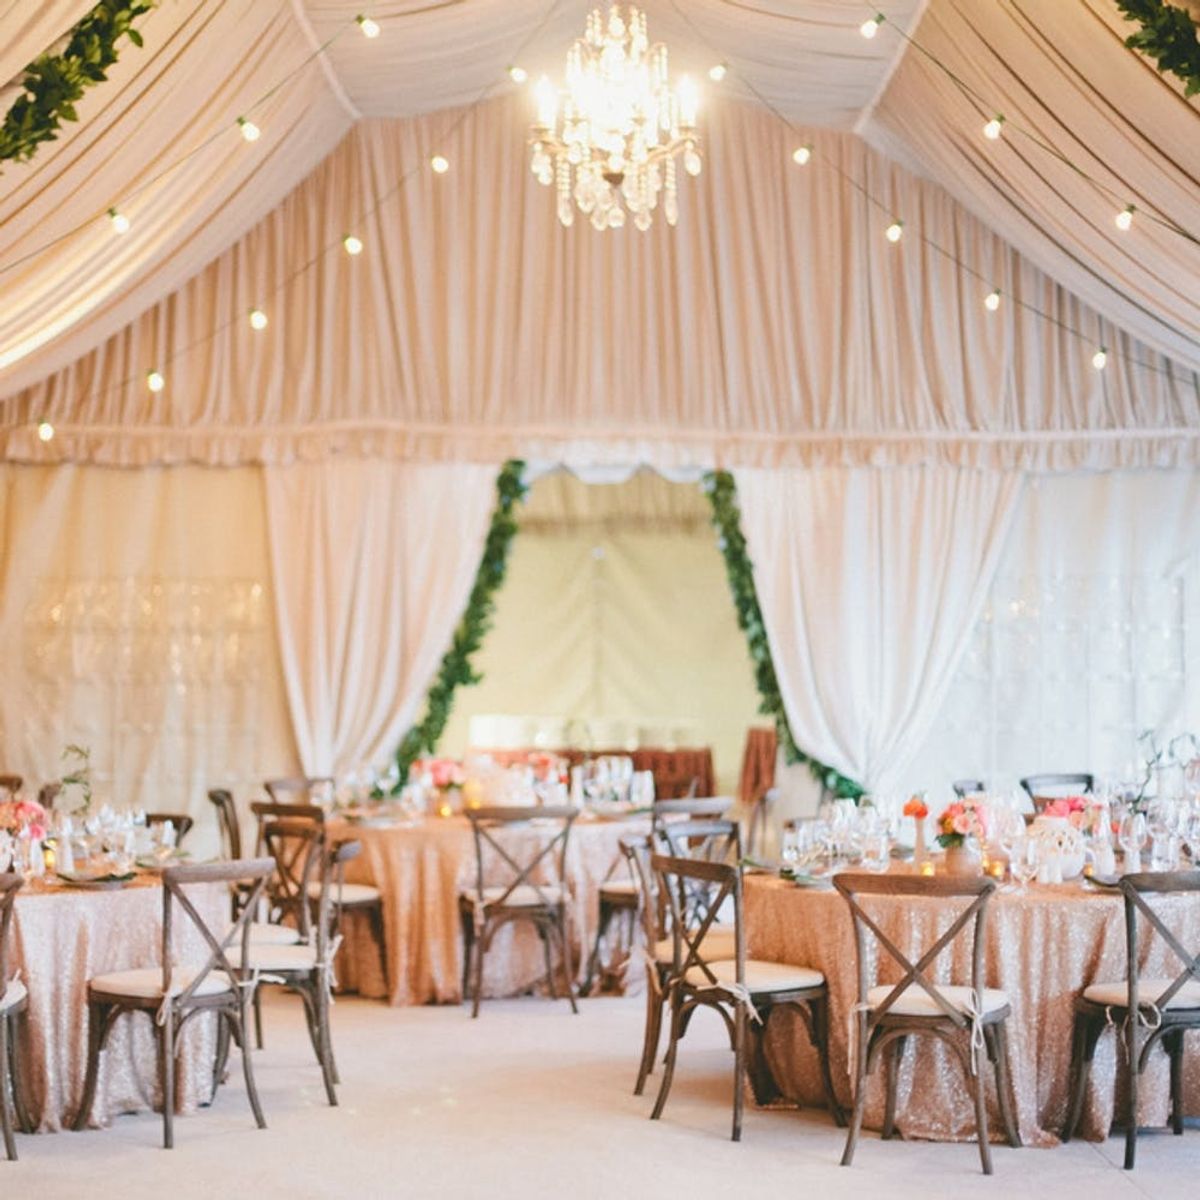 15 Gorgeous Ways to Decorate Your Wedding Tent